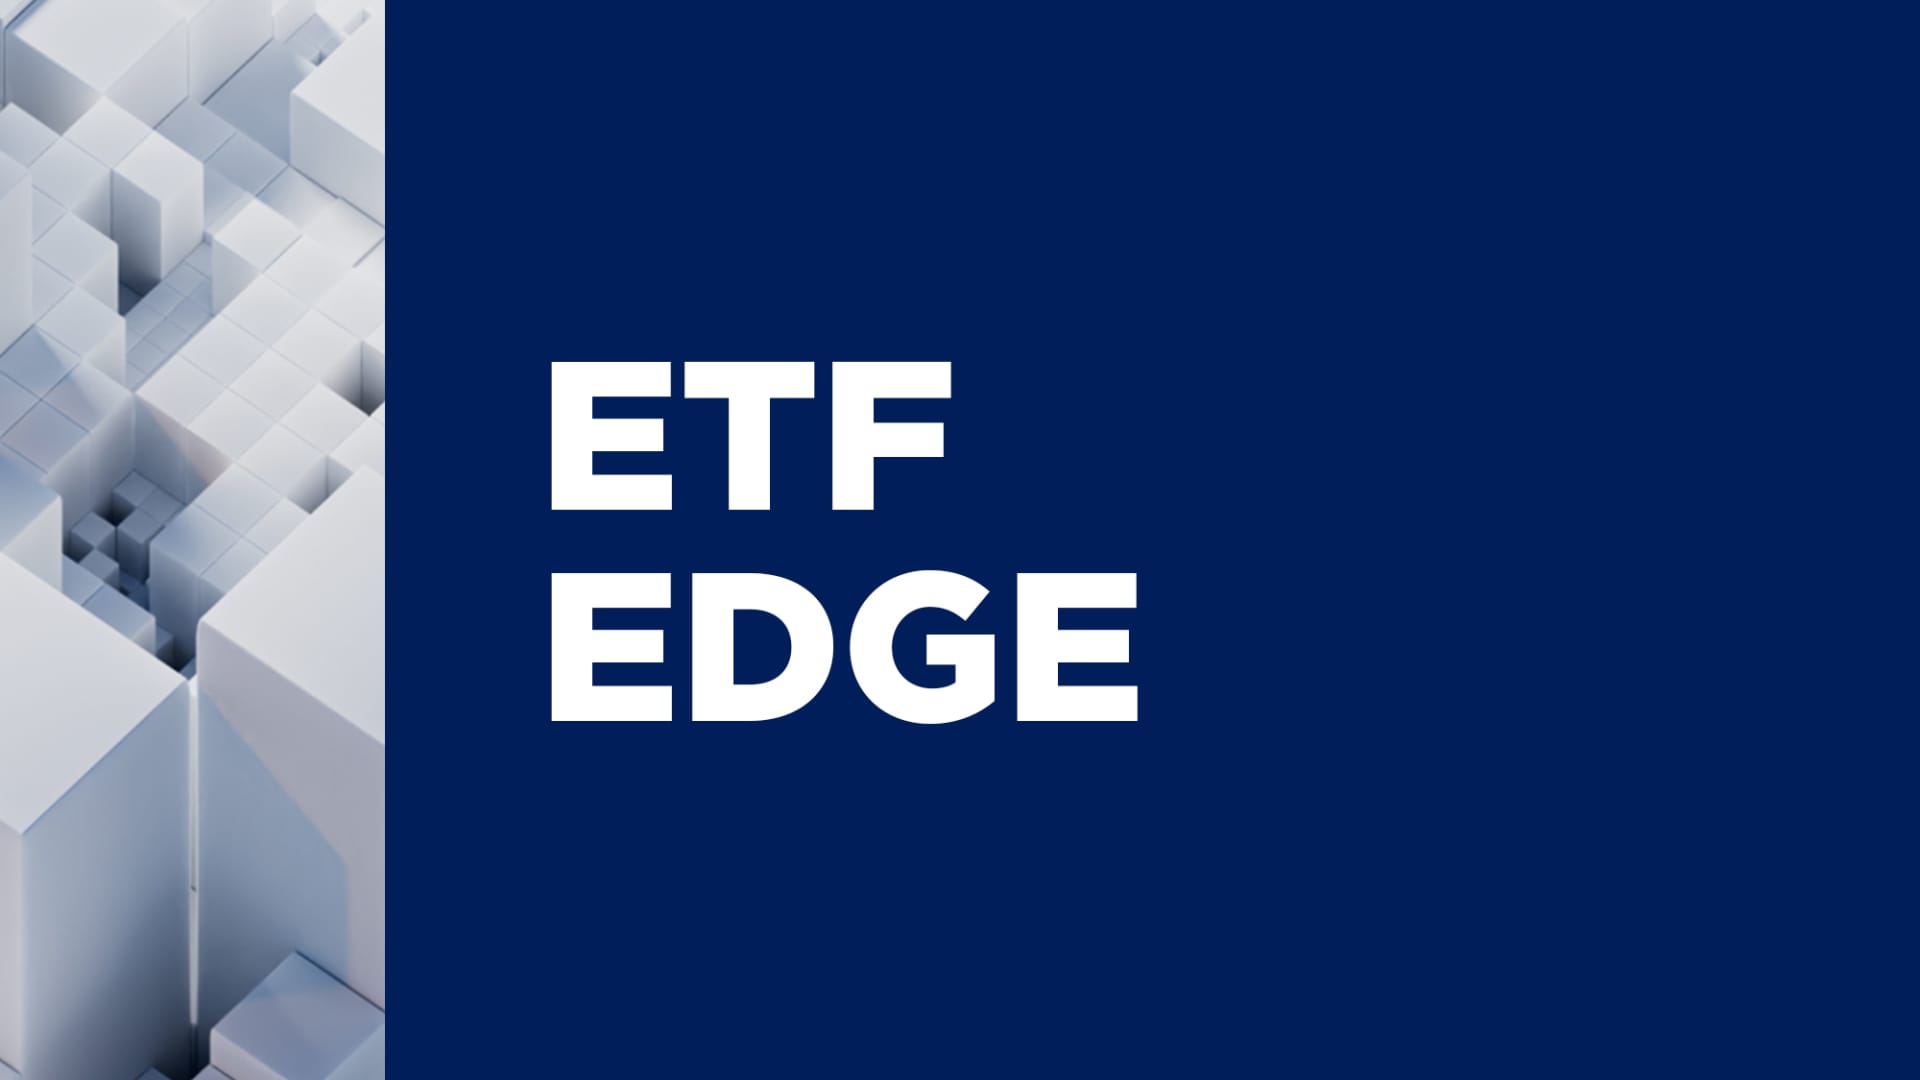 ETF Edge on gold funds beating stocks & bonds… but why? [Video]